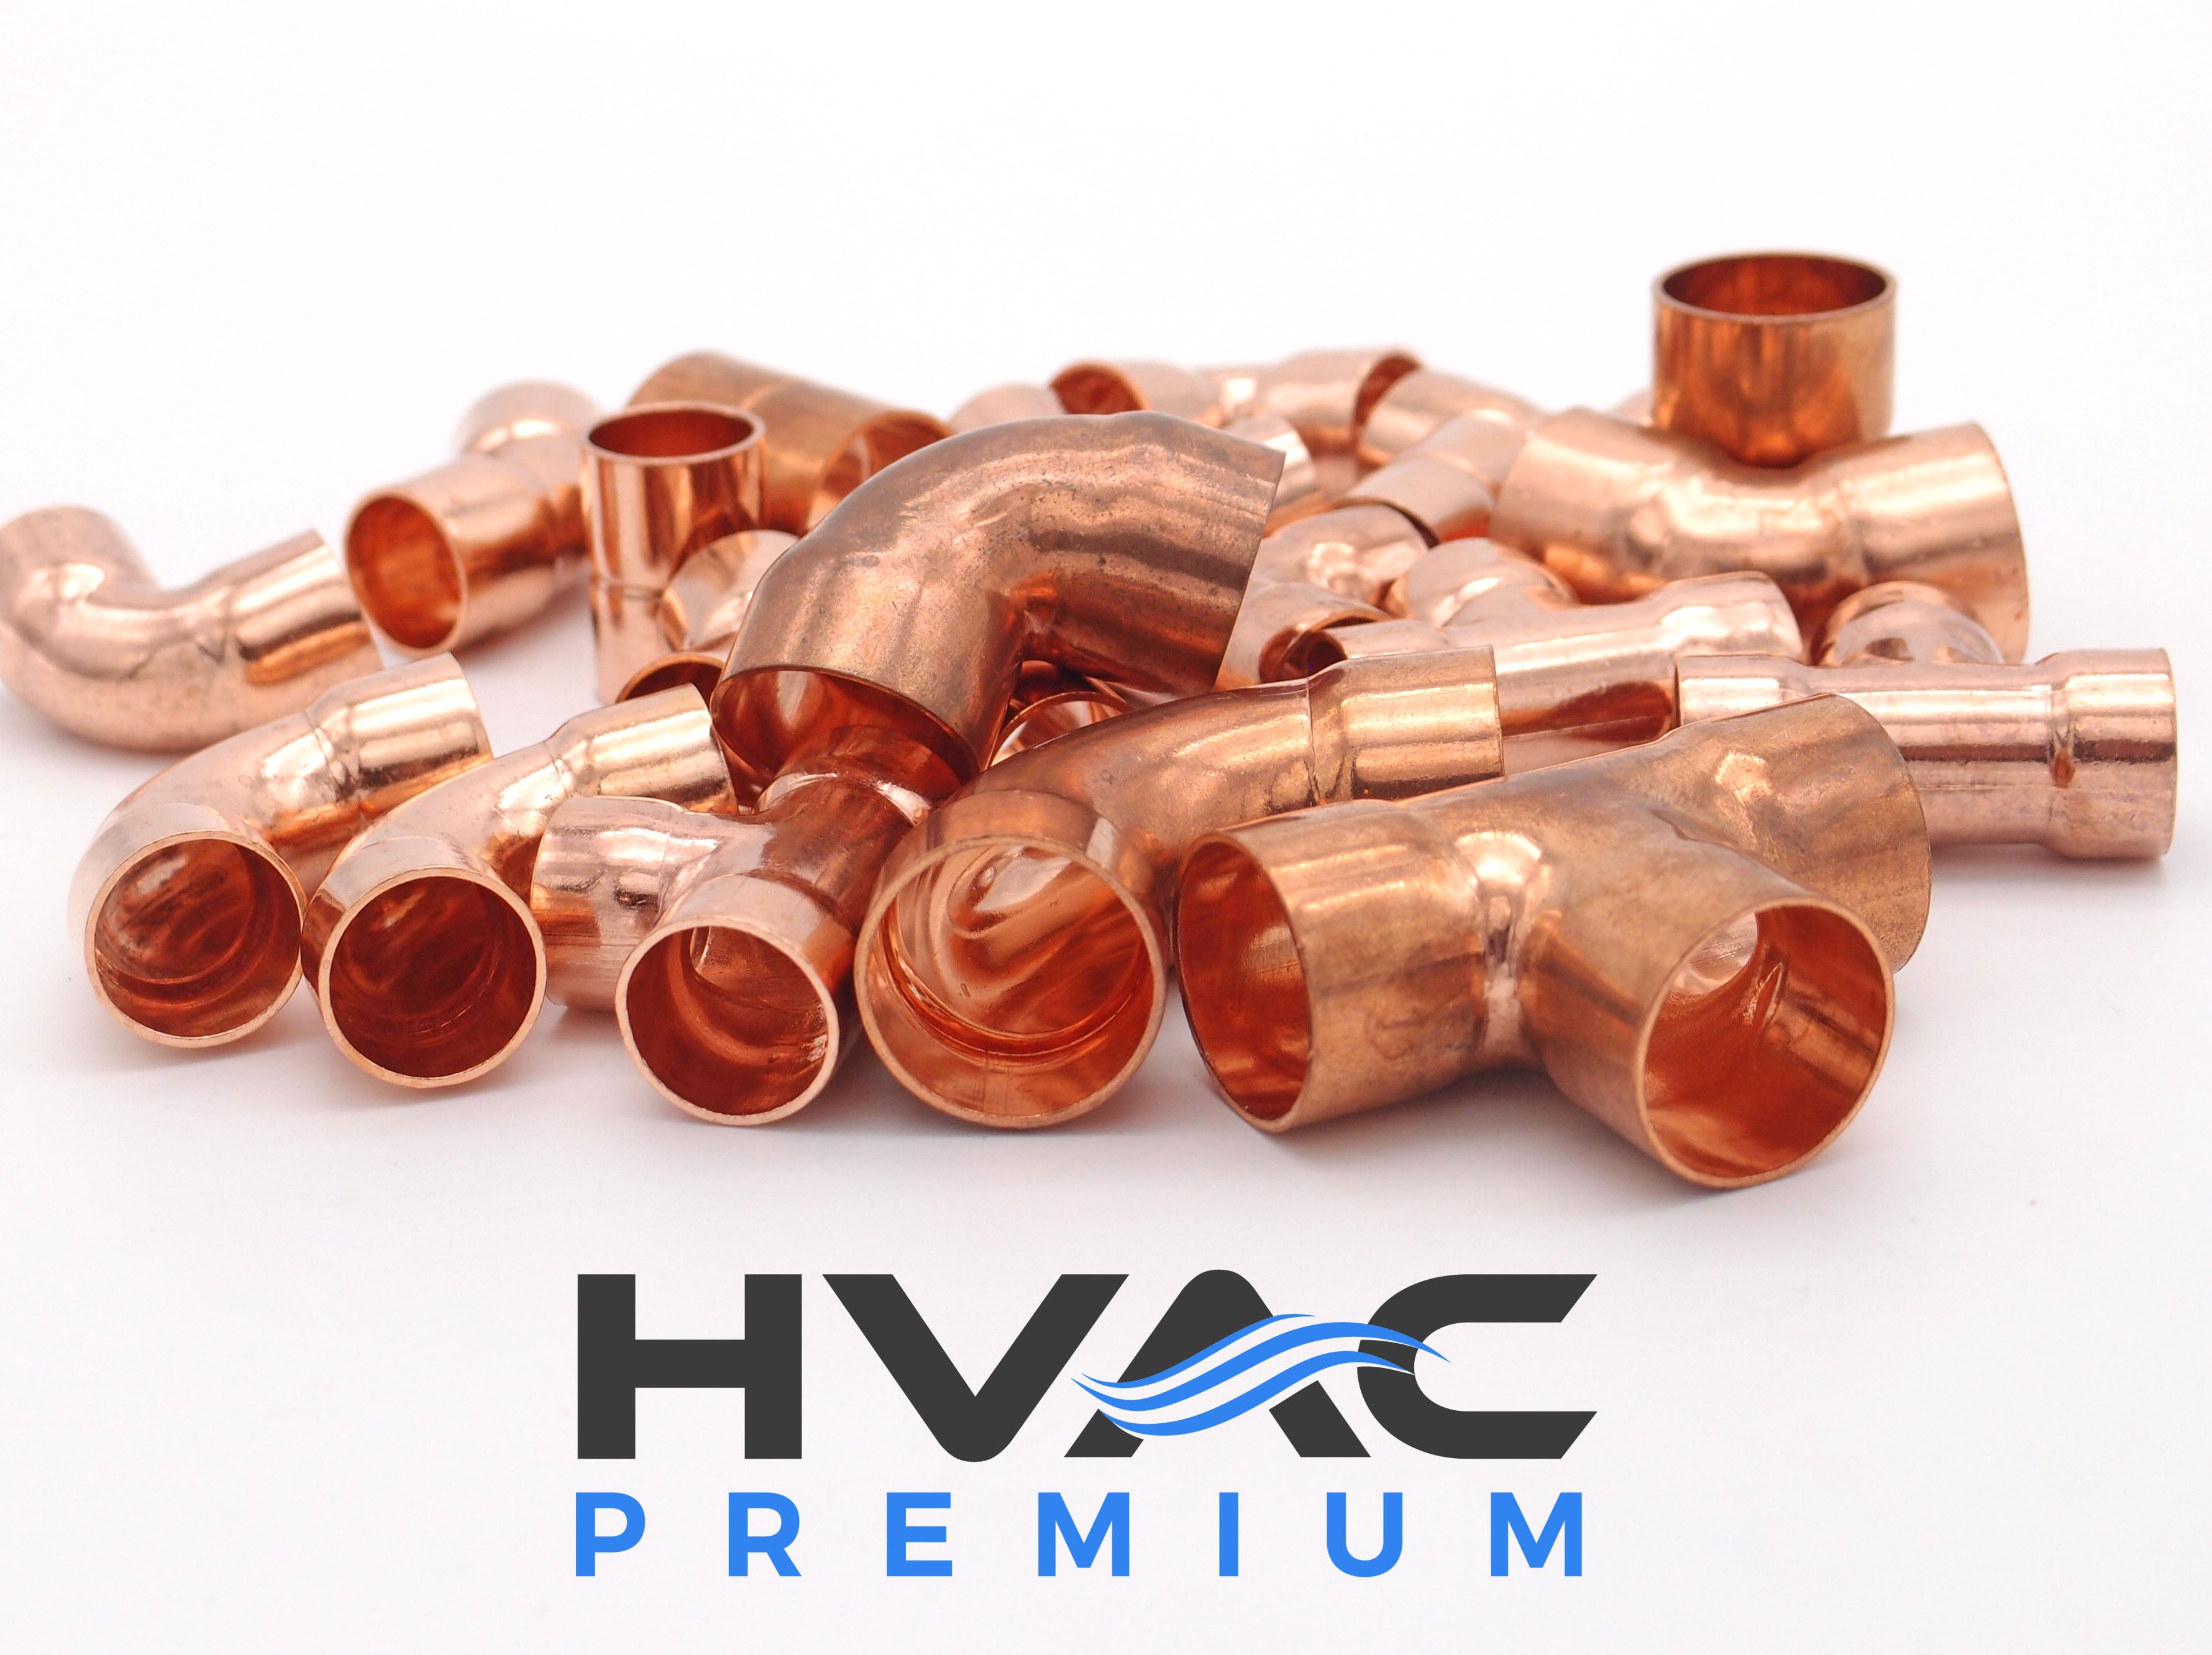 Copper Fitting 3/4 Inch (HVAC Outer Dimension) 5/8 Inch (Plumbing Inner Dimension) - Straight Copper Coupling Fittings With Rolled Tube Stop & HVAC – 99.9% Pure Copper - 10 Pack